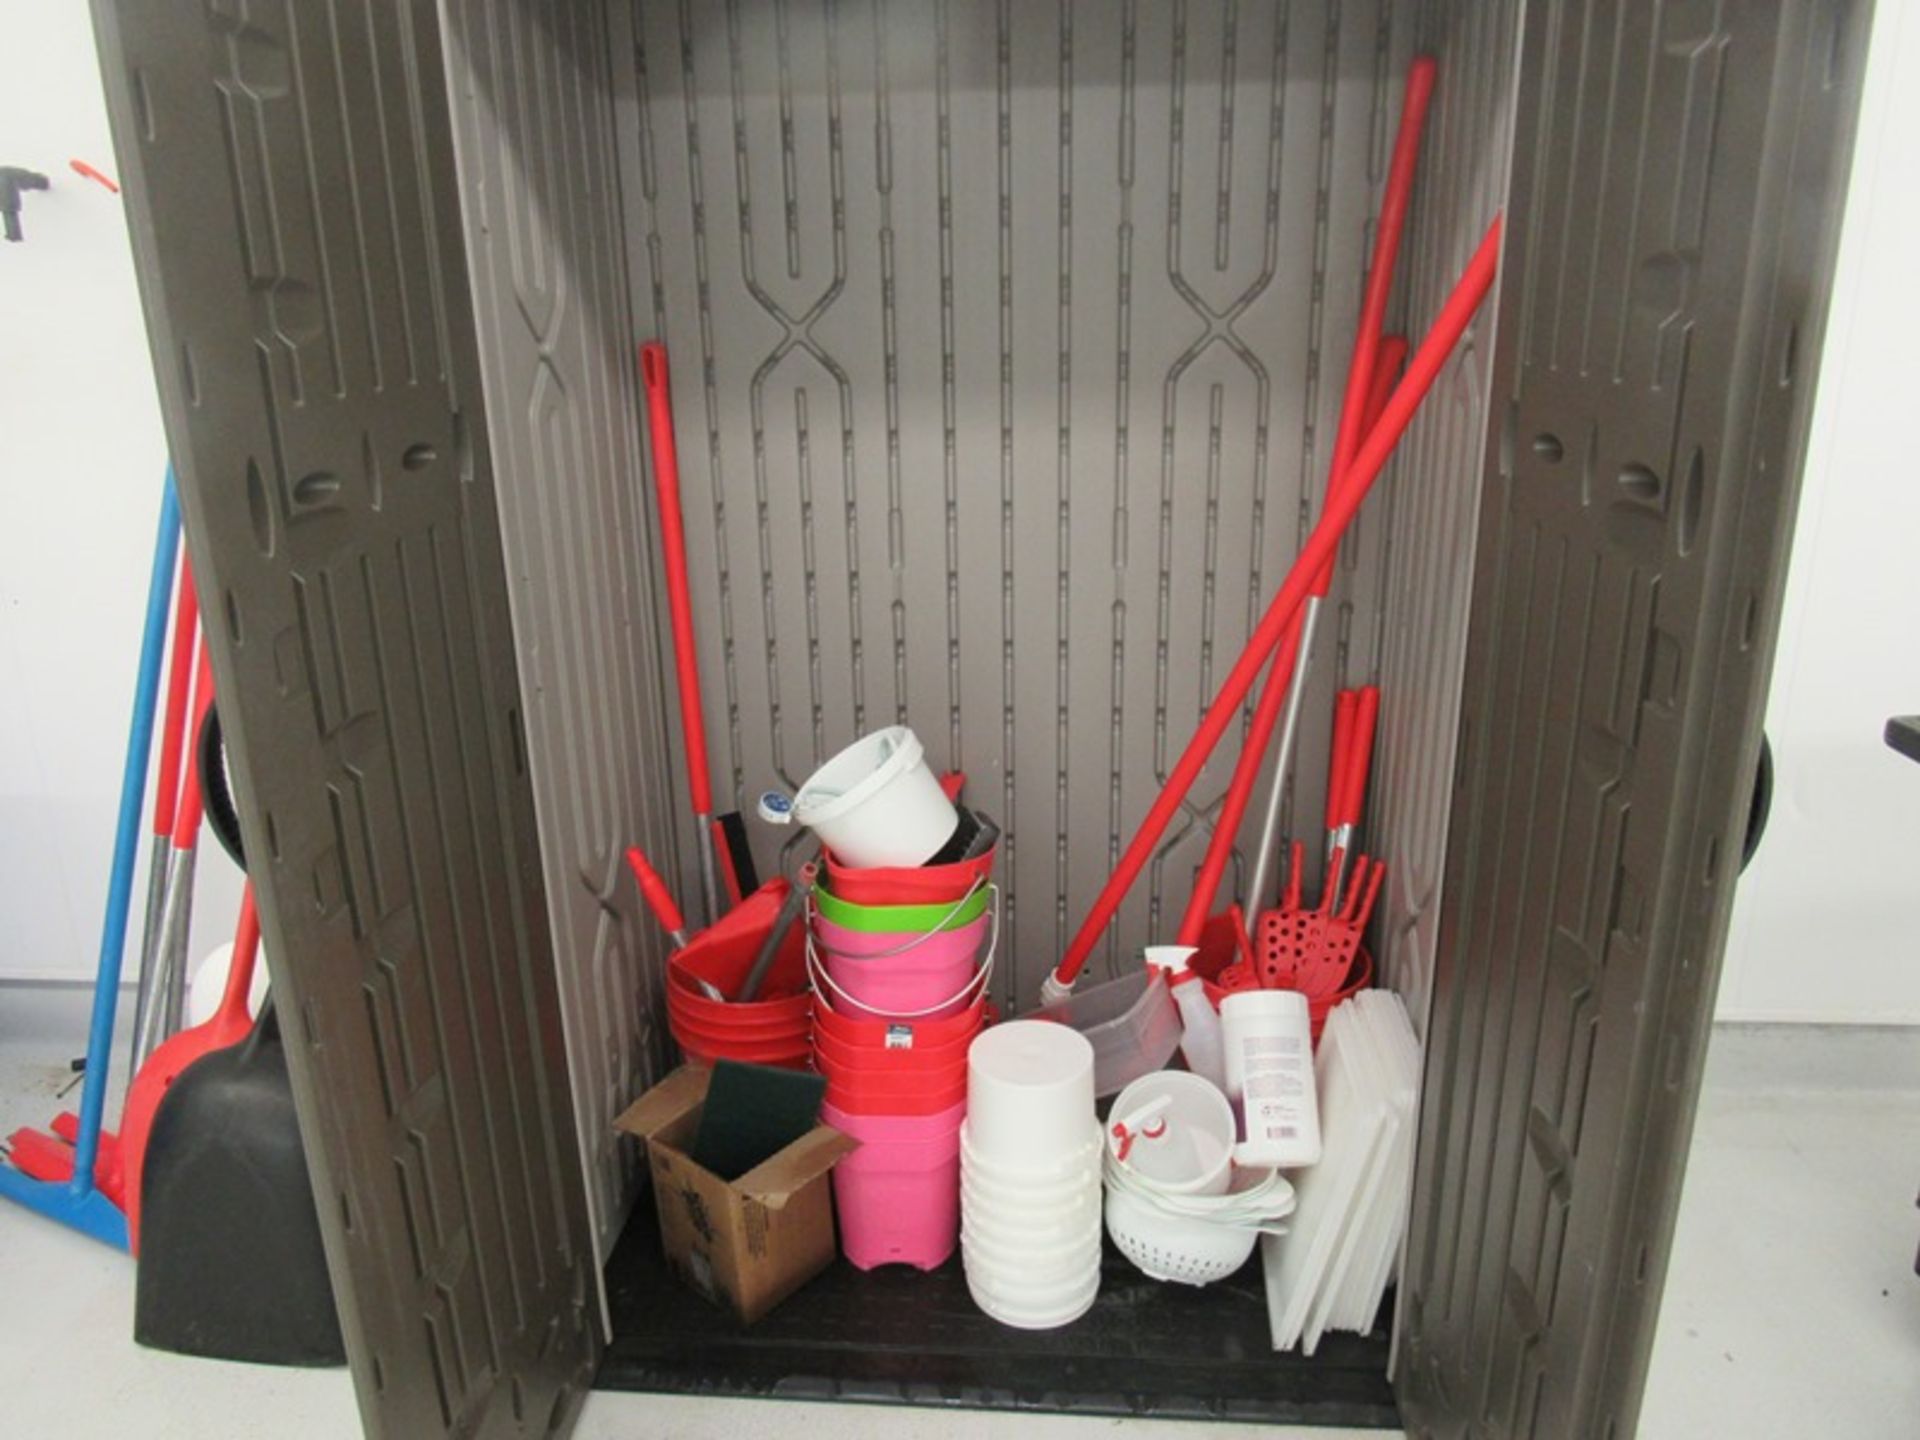 Lot of Rubbermaid Cabinet with buckets, squeegees, shovels, etc. (Required Rigging Fee: $50.00- - Image 2 of 2